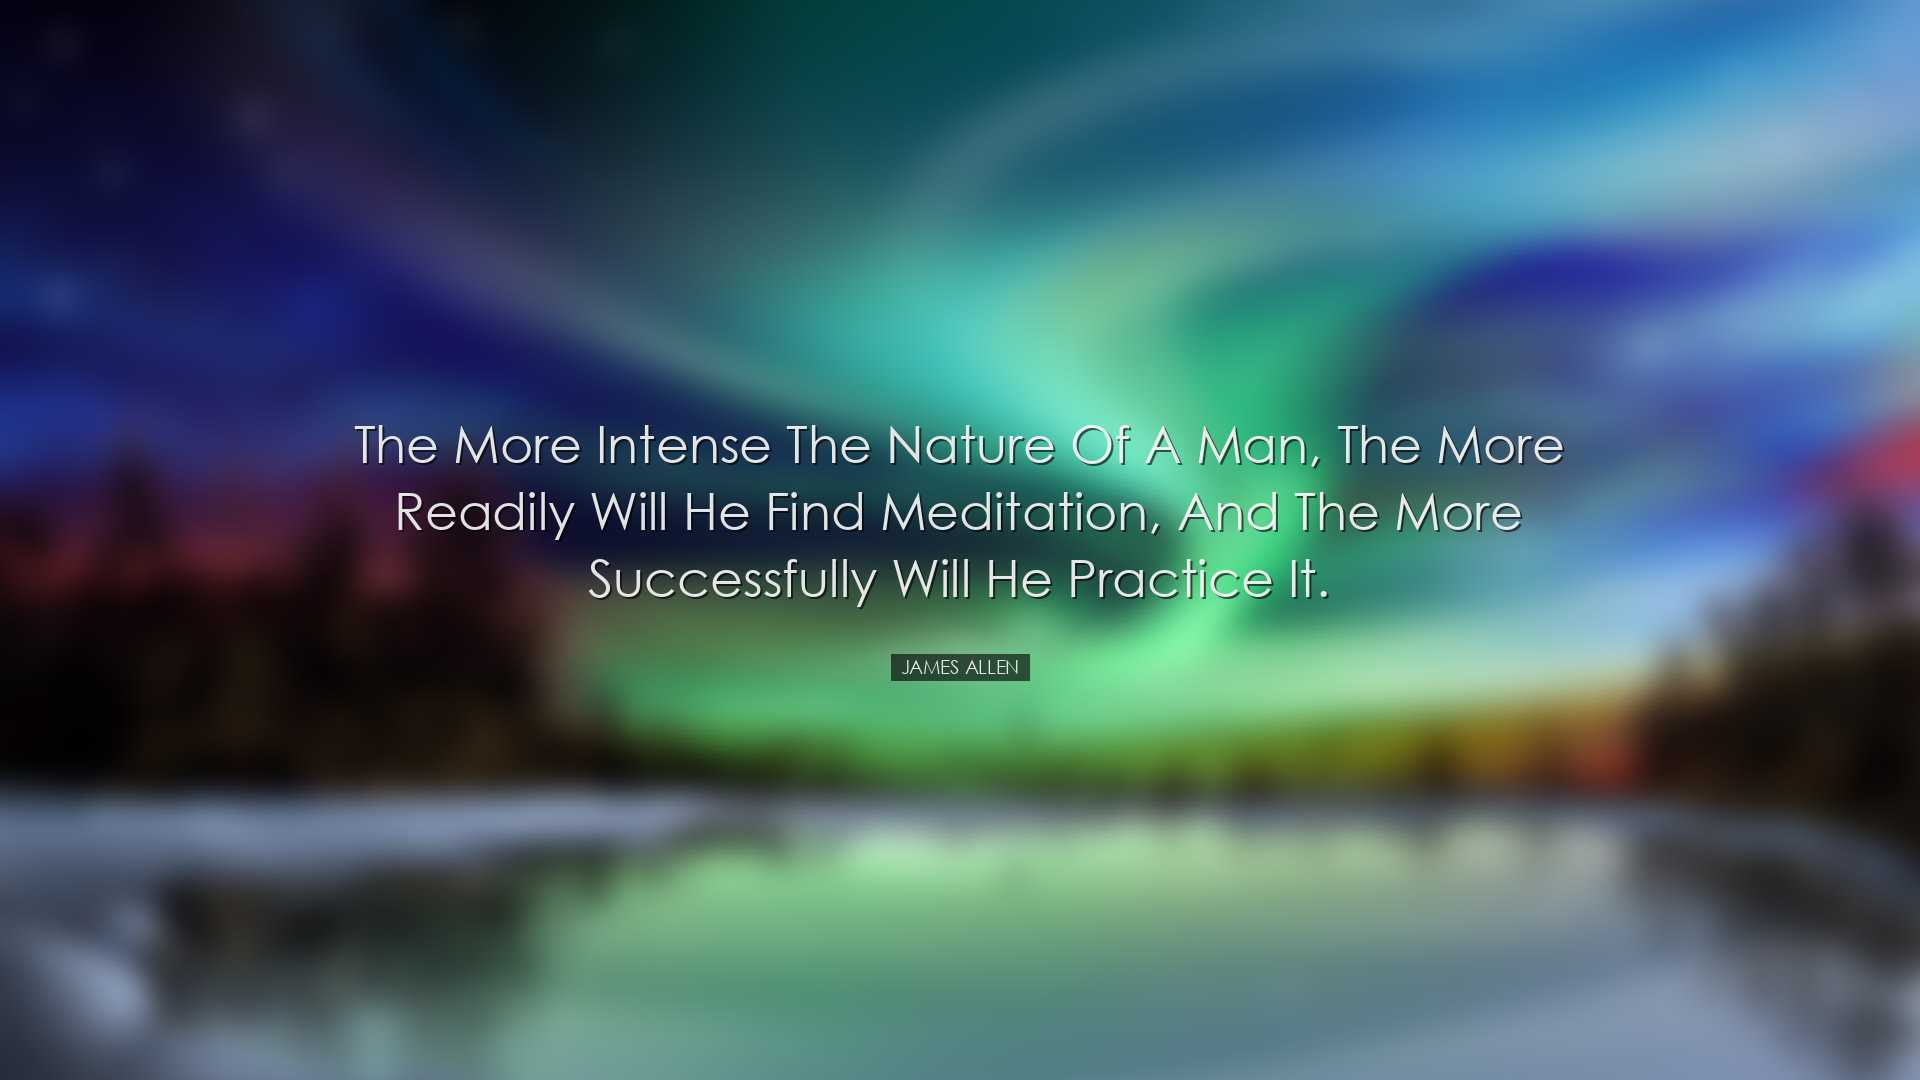 The more intense the nature of a man, the more readily will he fin